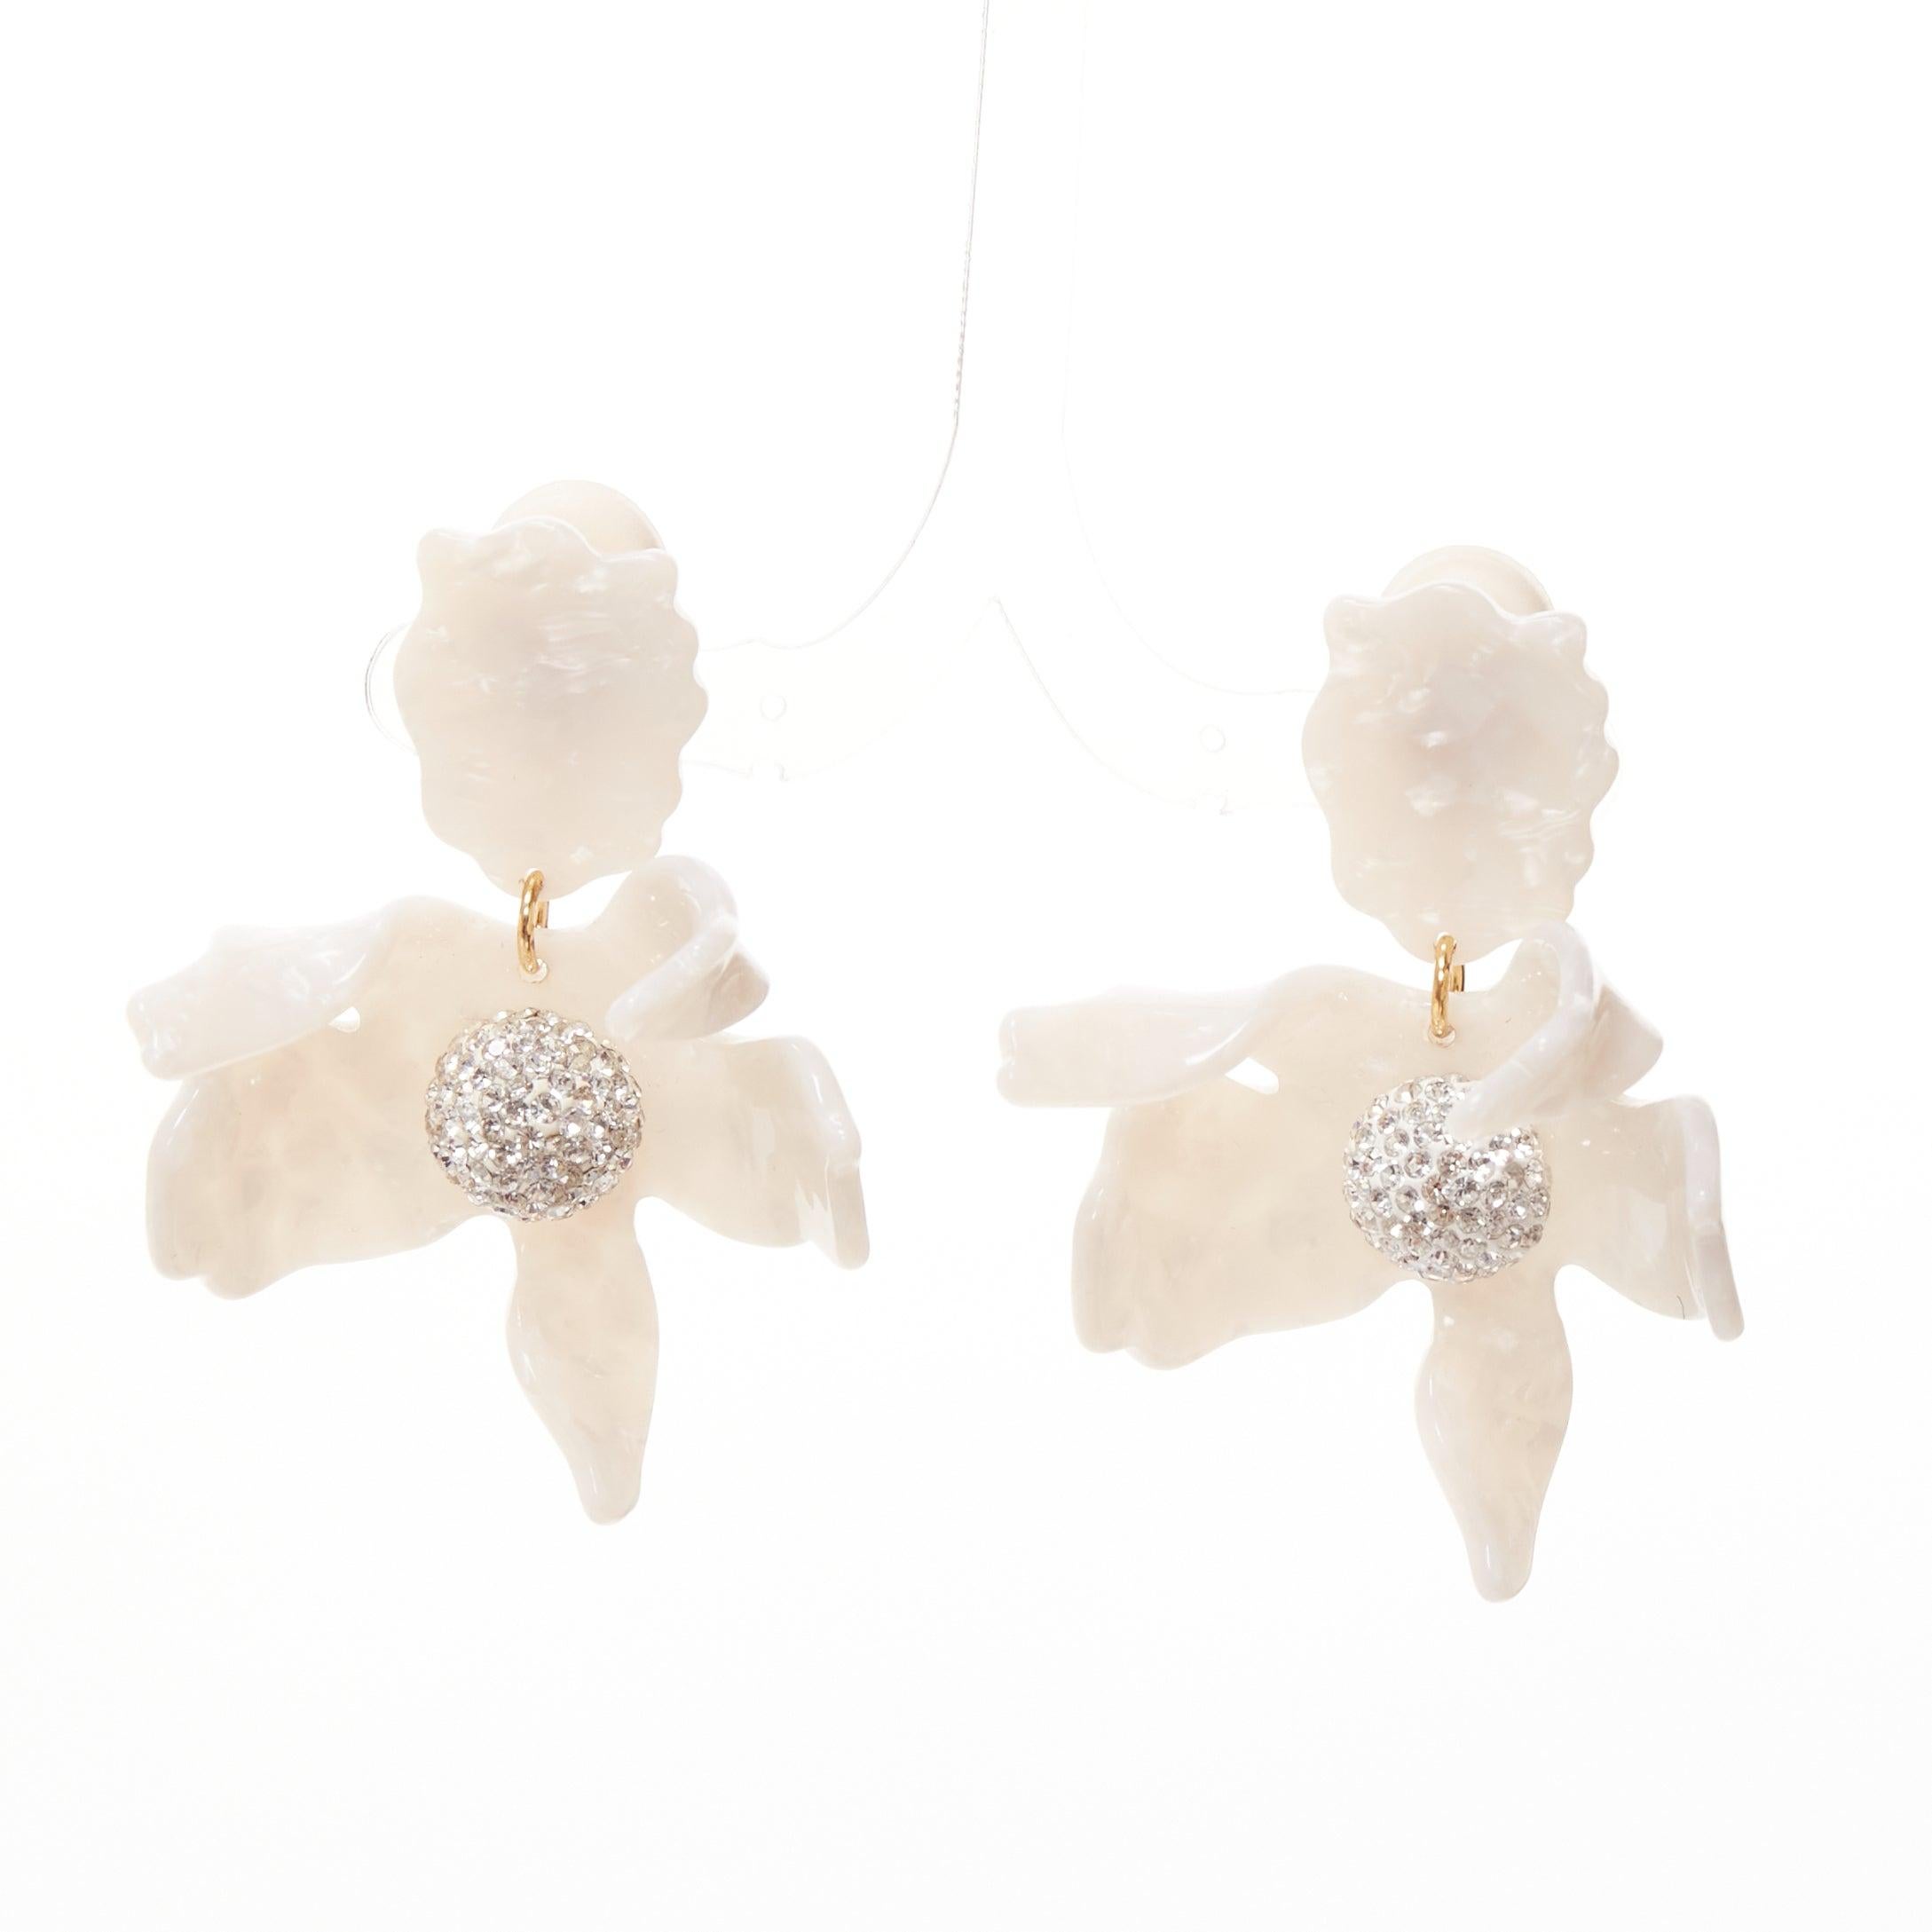 LELE SADOUGHI white marbled acrylic flower silver crystals clip on earrings
Reference: AAWC/A01230
Brand: Lele Sadoughi
Material: Acrylic
Color: White, Silver
Pattern: Floral
Closure: Clip On
Lining: Gold Metal

CONDITION:
Condition: Very good, this